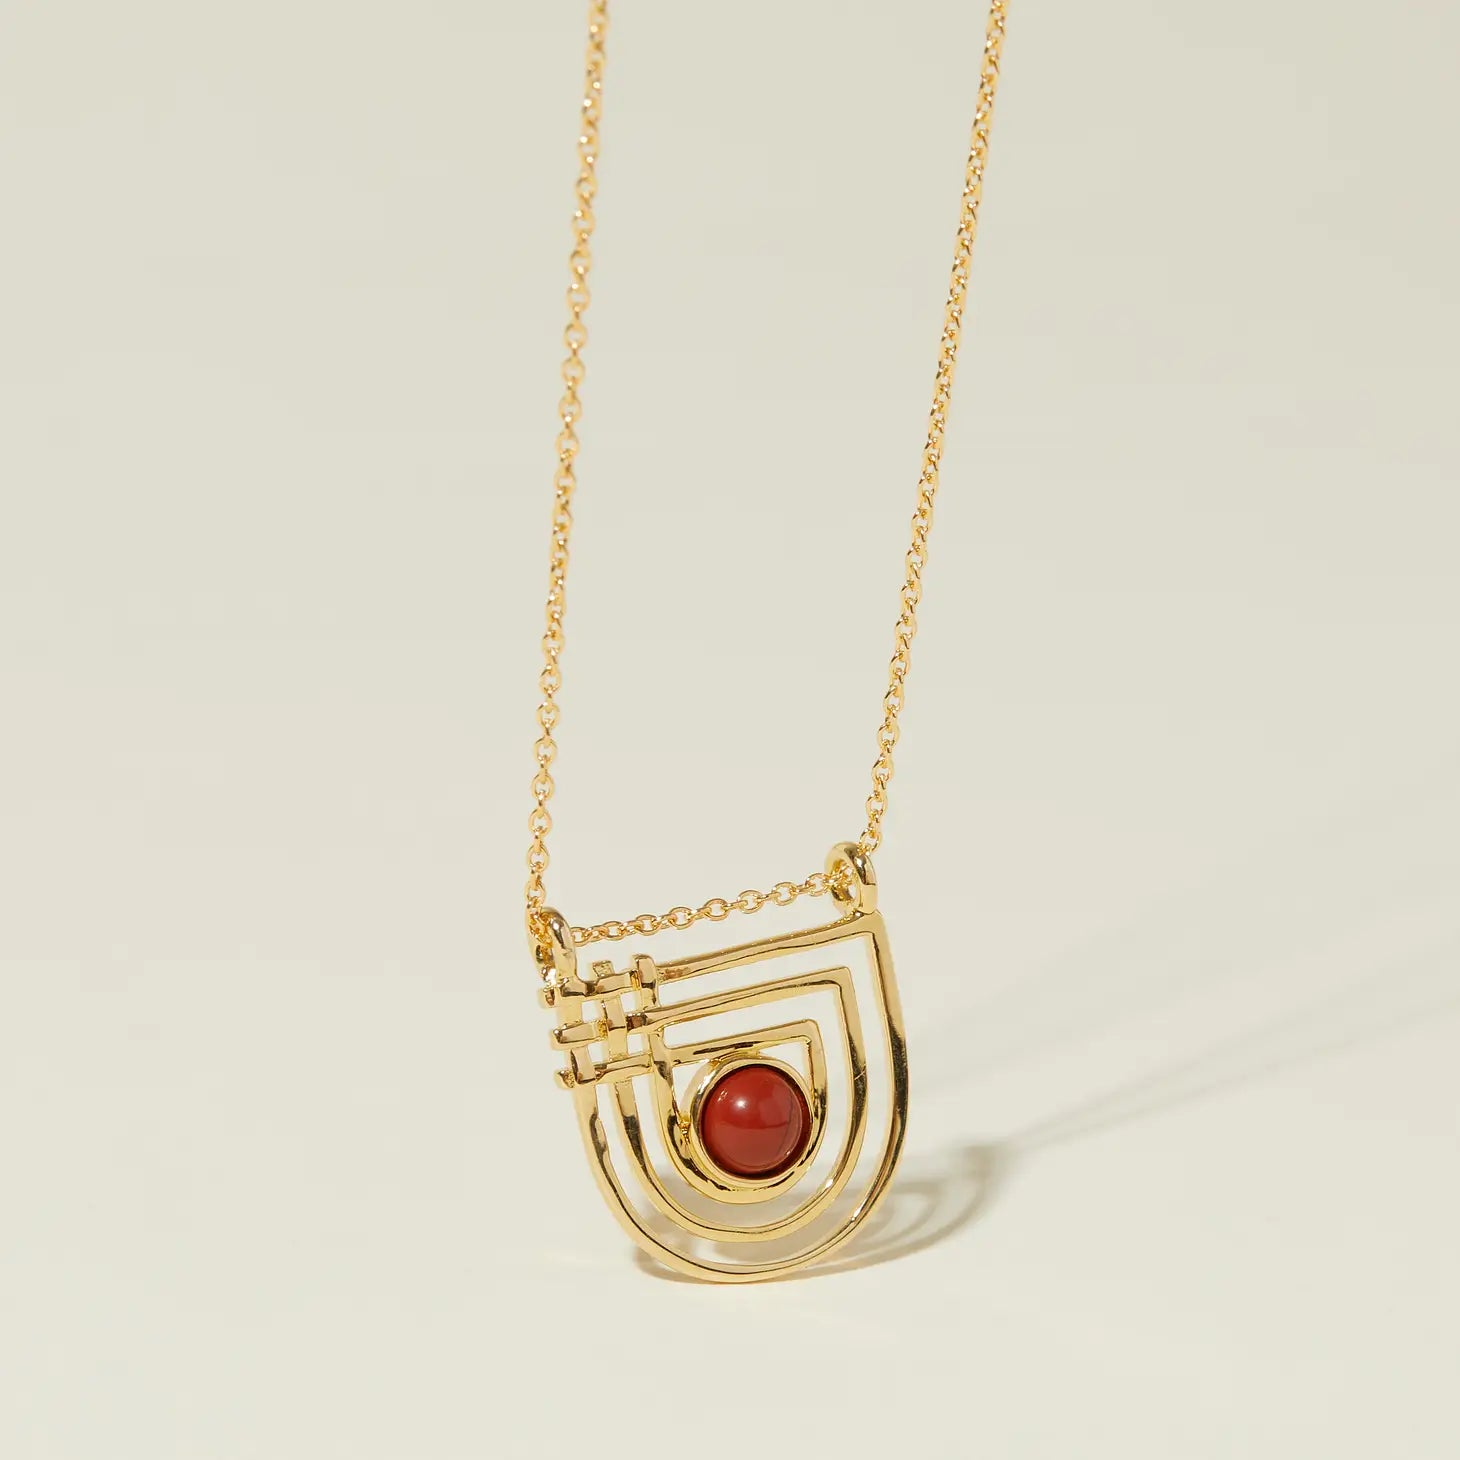 Lindsay Lewis Jewelry Golden Era Necklace - Red Jasper | Prelude & Dawn | Los Angeles